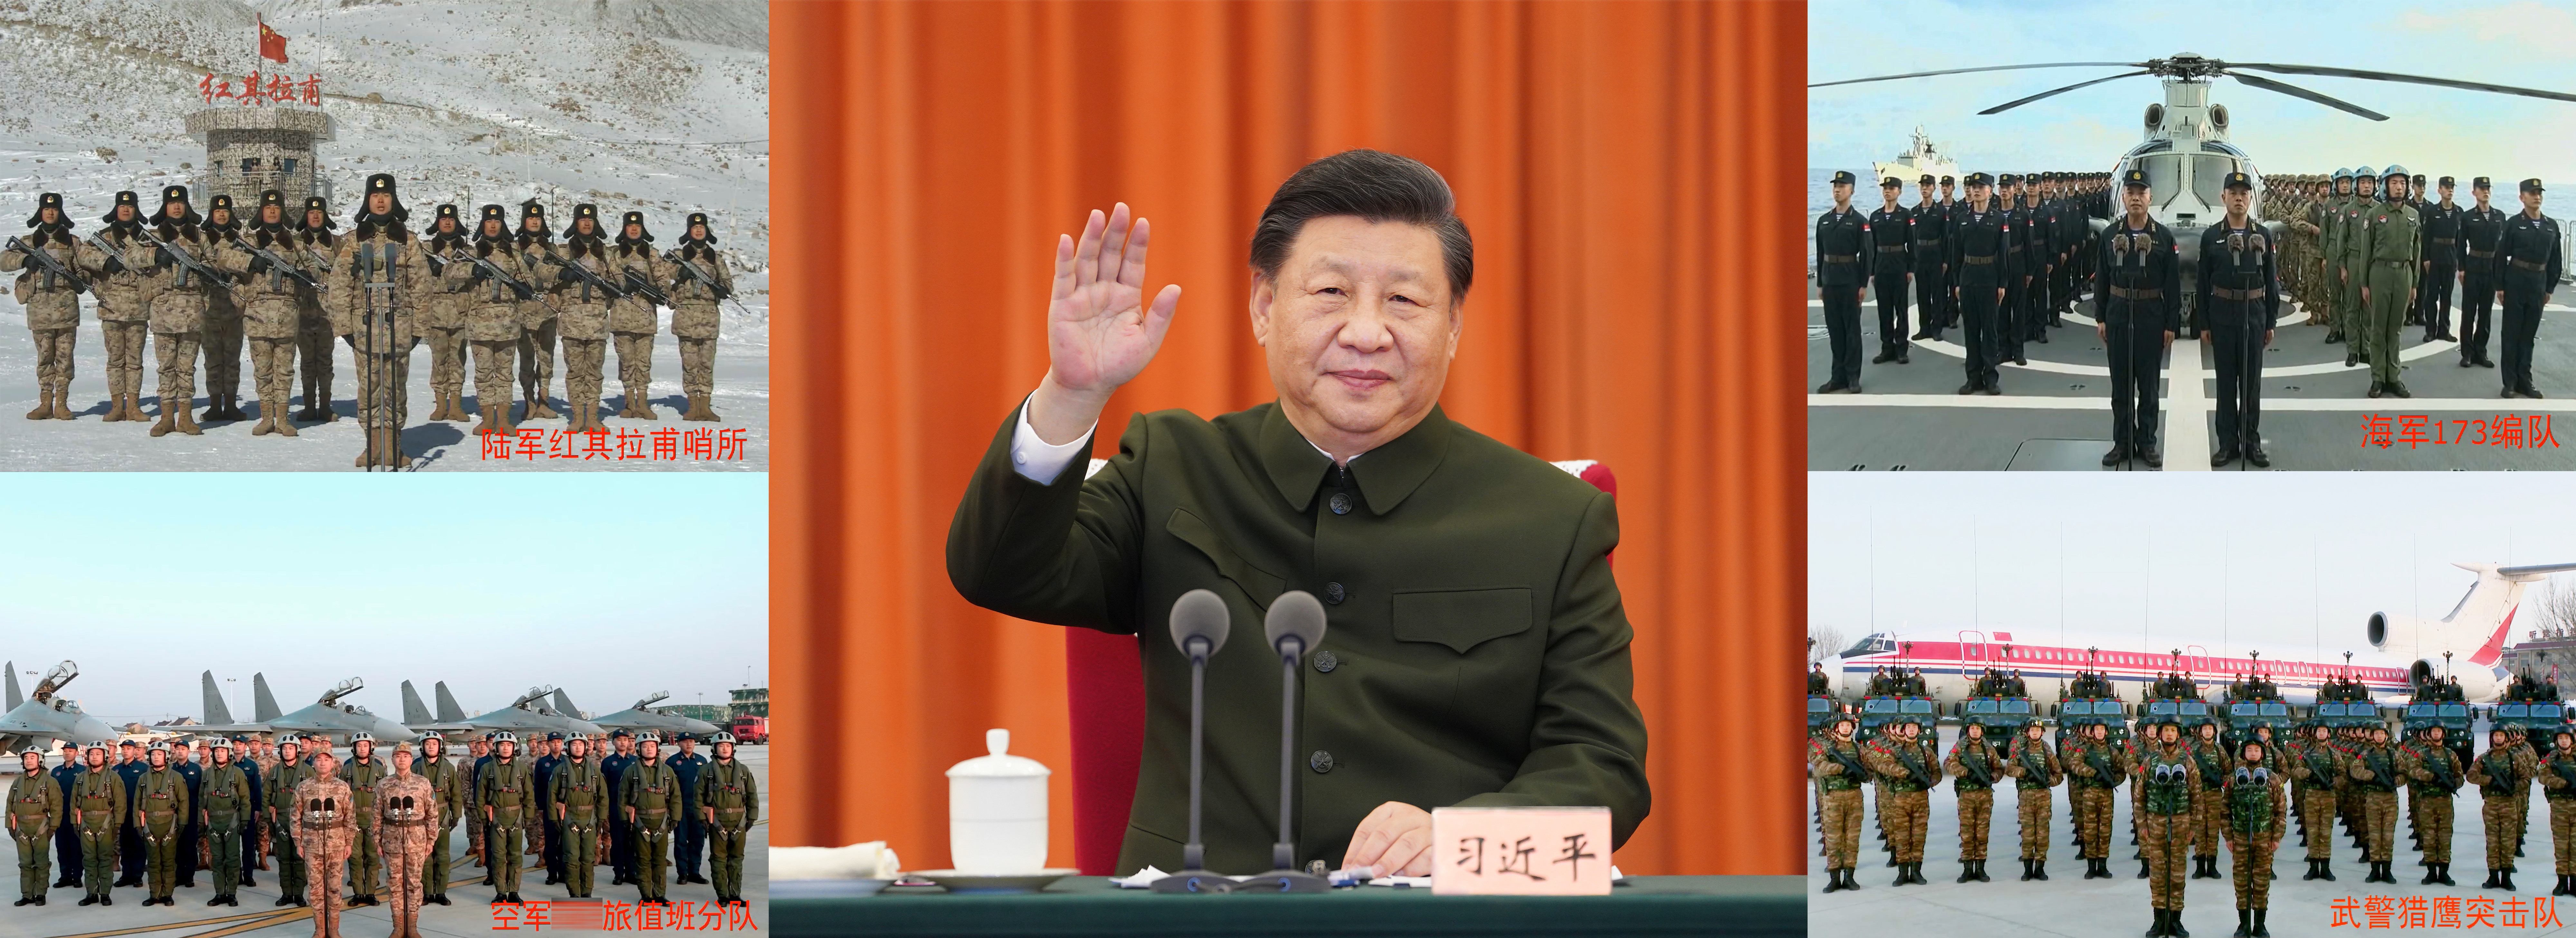 President Xi Jinping inspects the combat readiness of the armed forces and extends Spring Festival greetings via video link in Beijing, China, January 19, 2023. /Xinhua